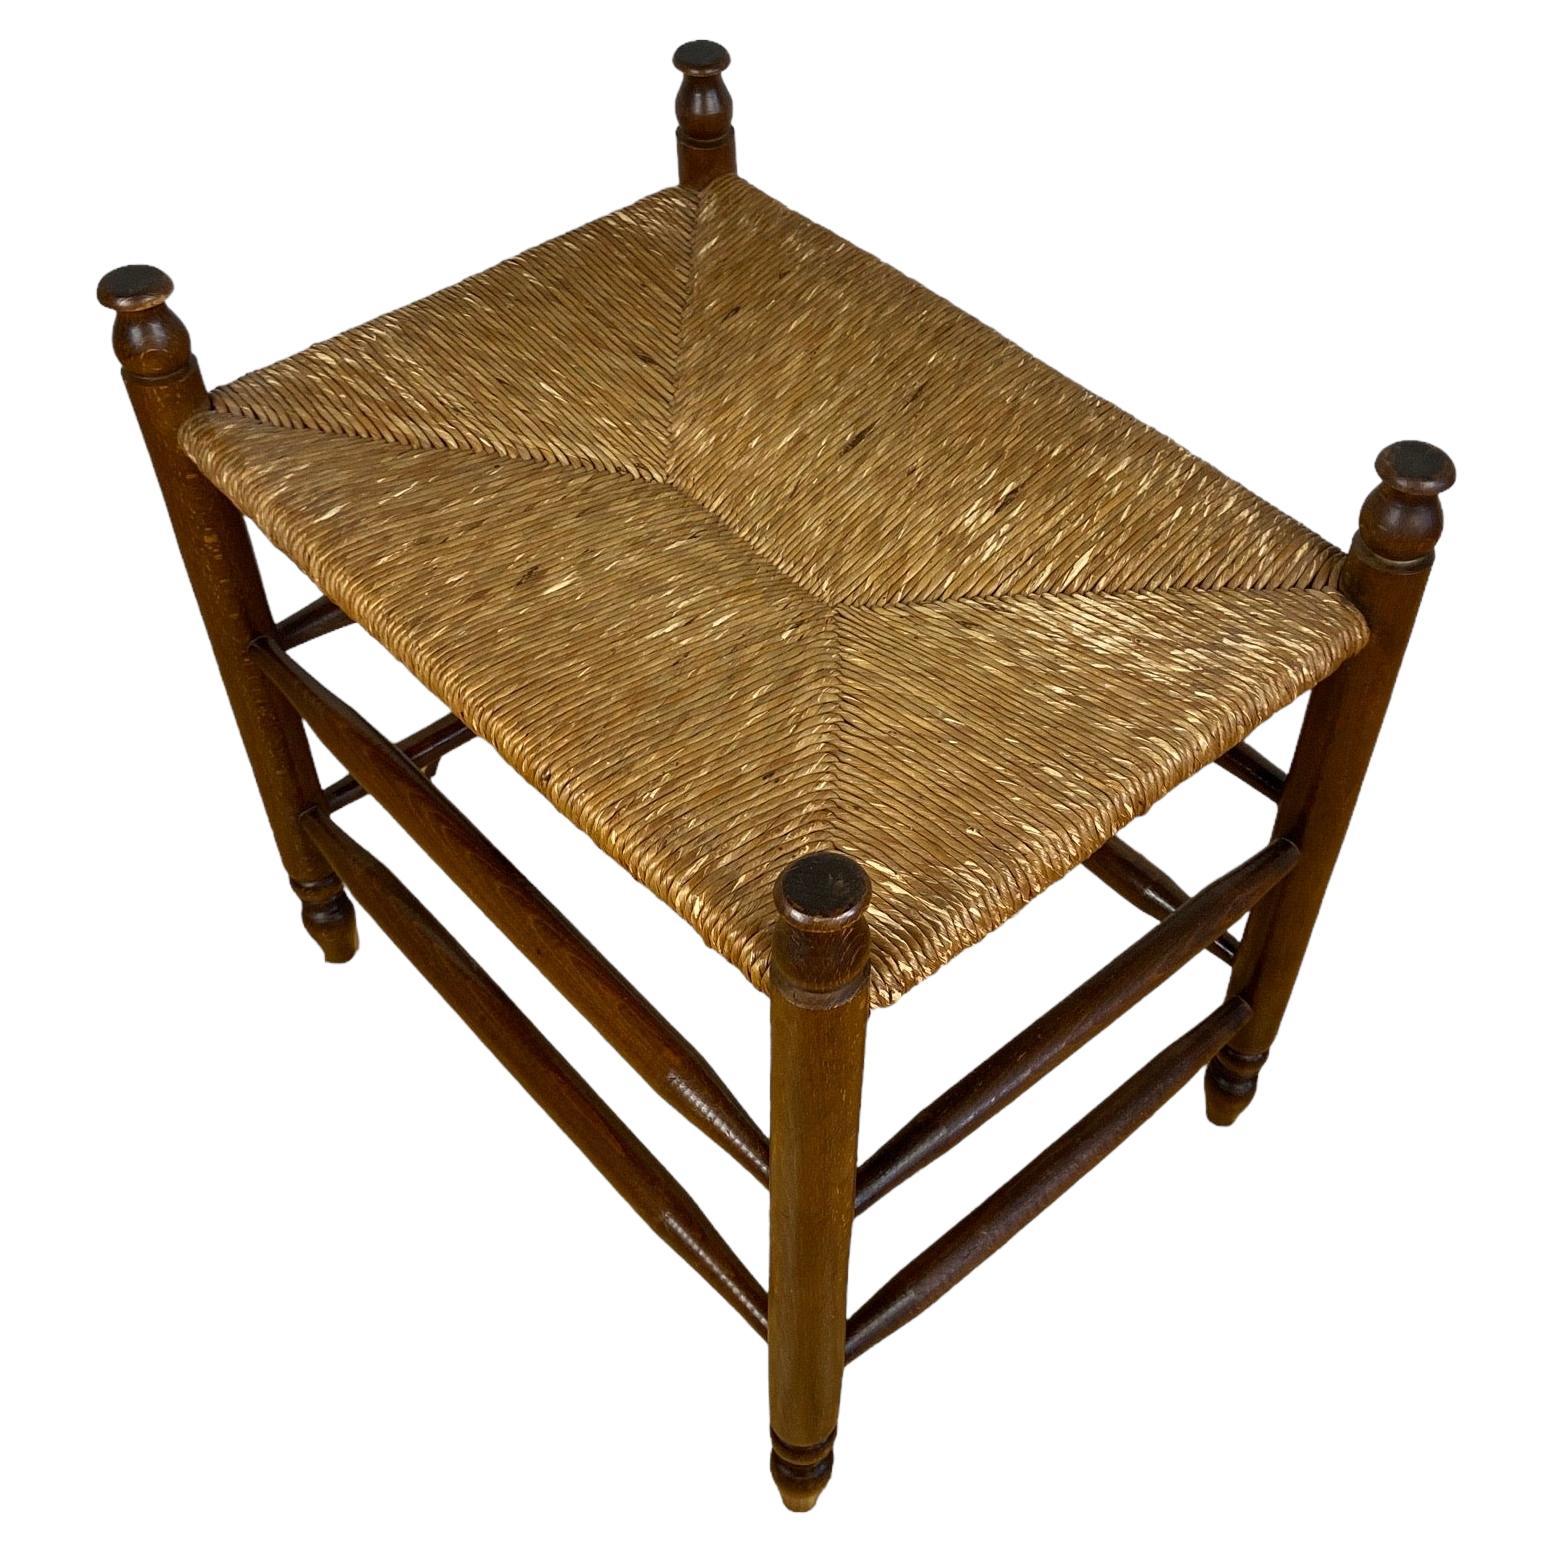 Fifties Stool Wicker Seat For Sale